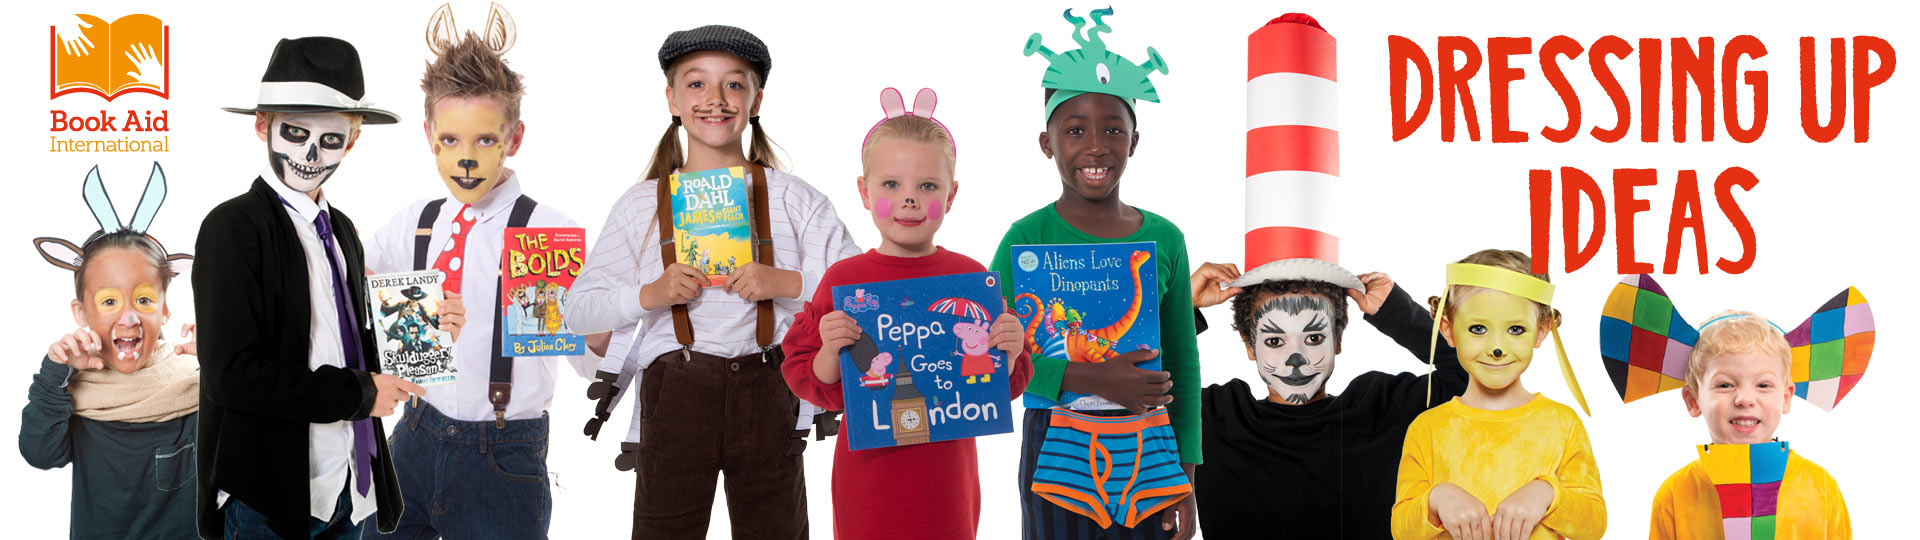 Dressing Up Ideas World Book Day